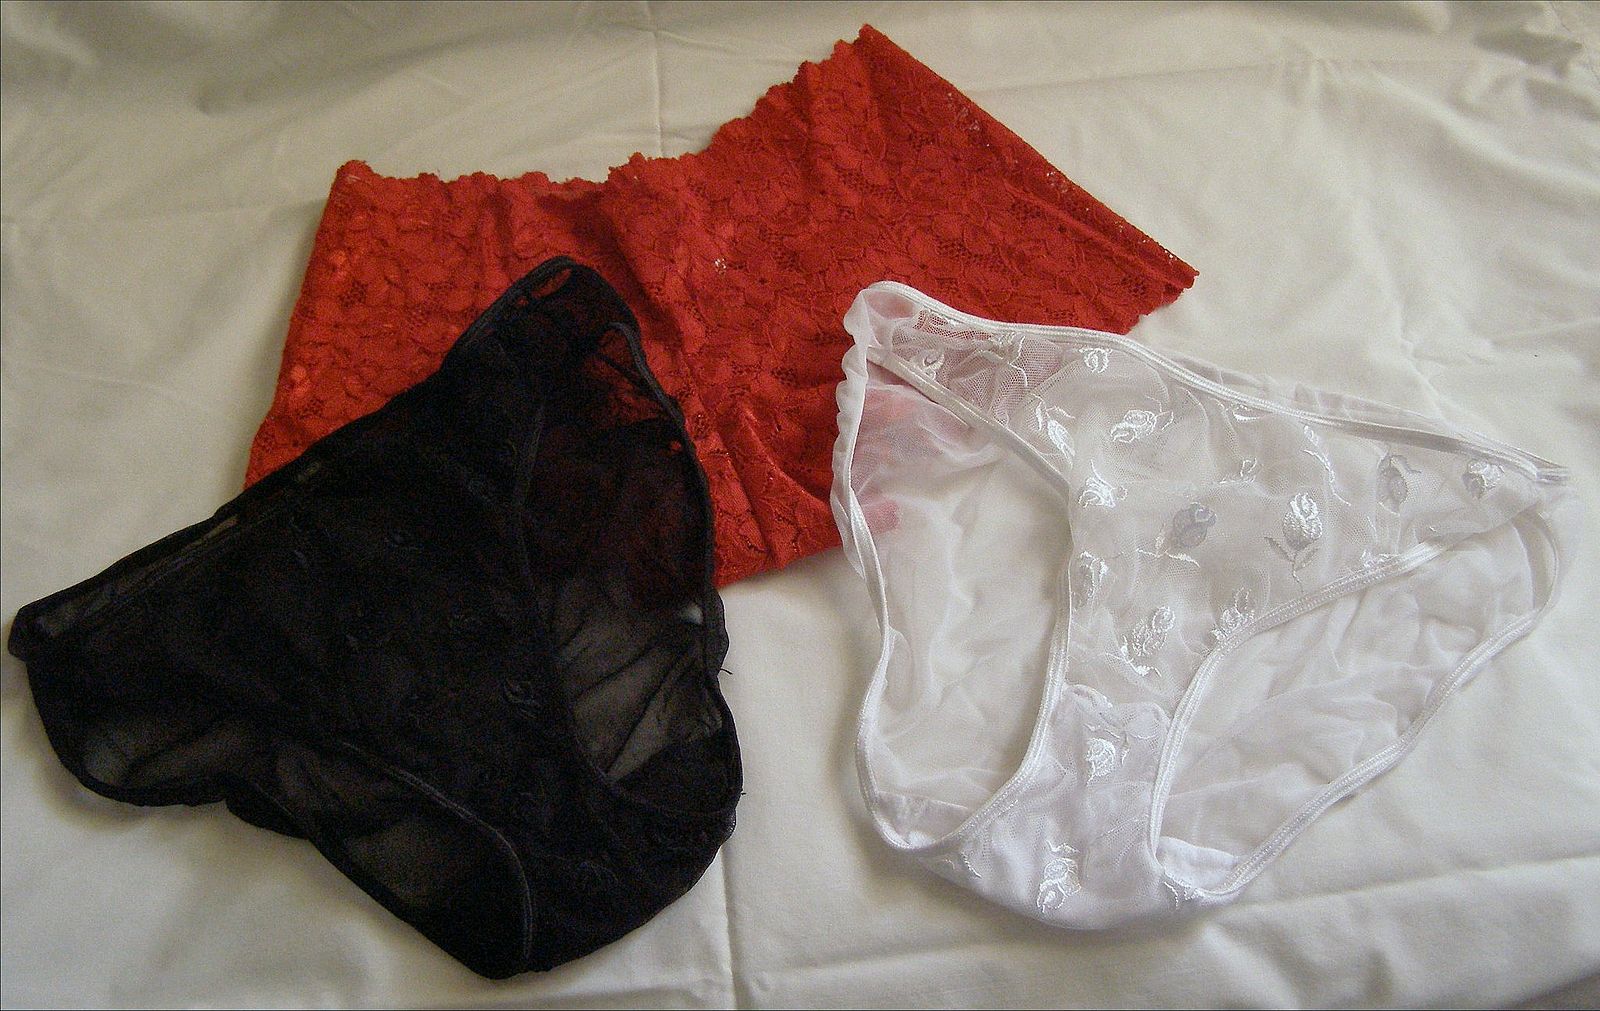 Buy Panty Sell online